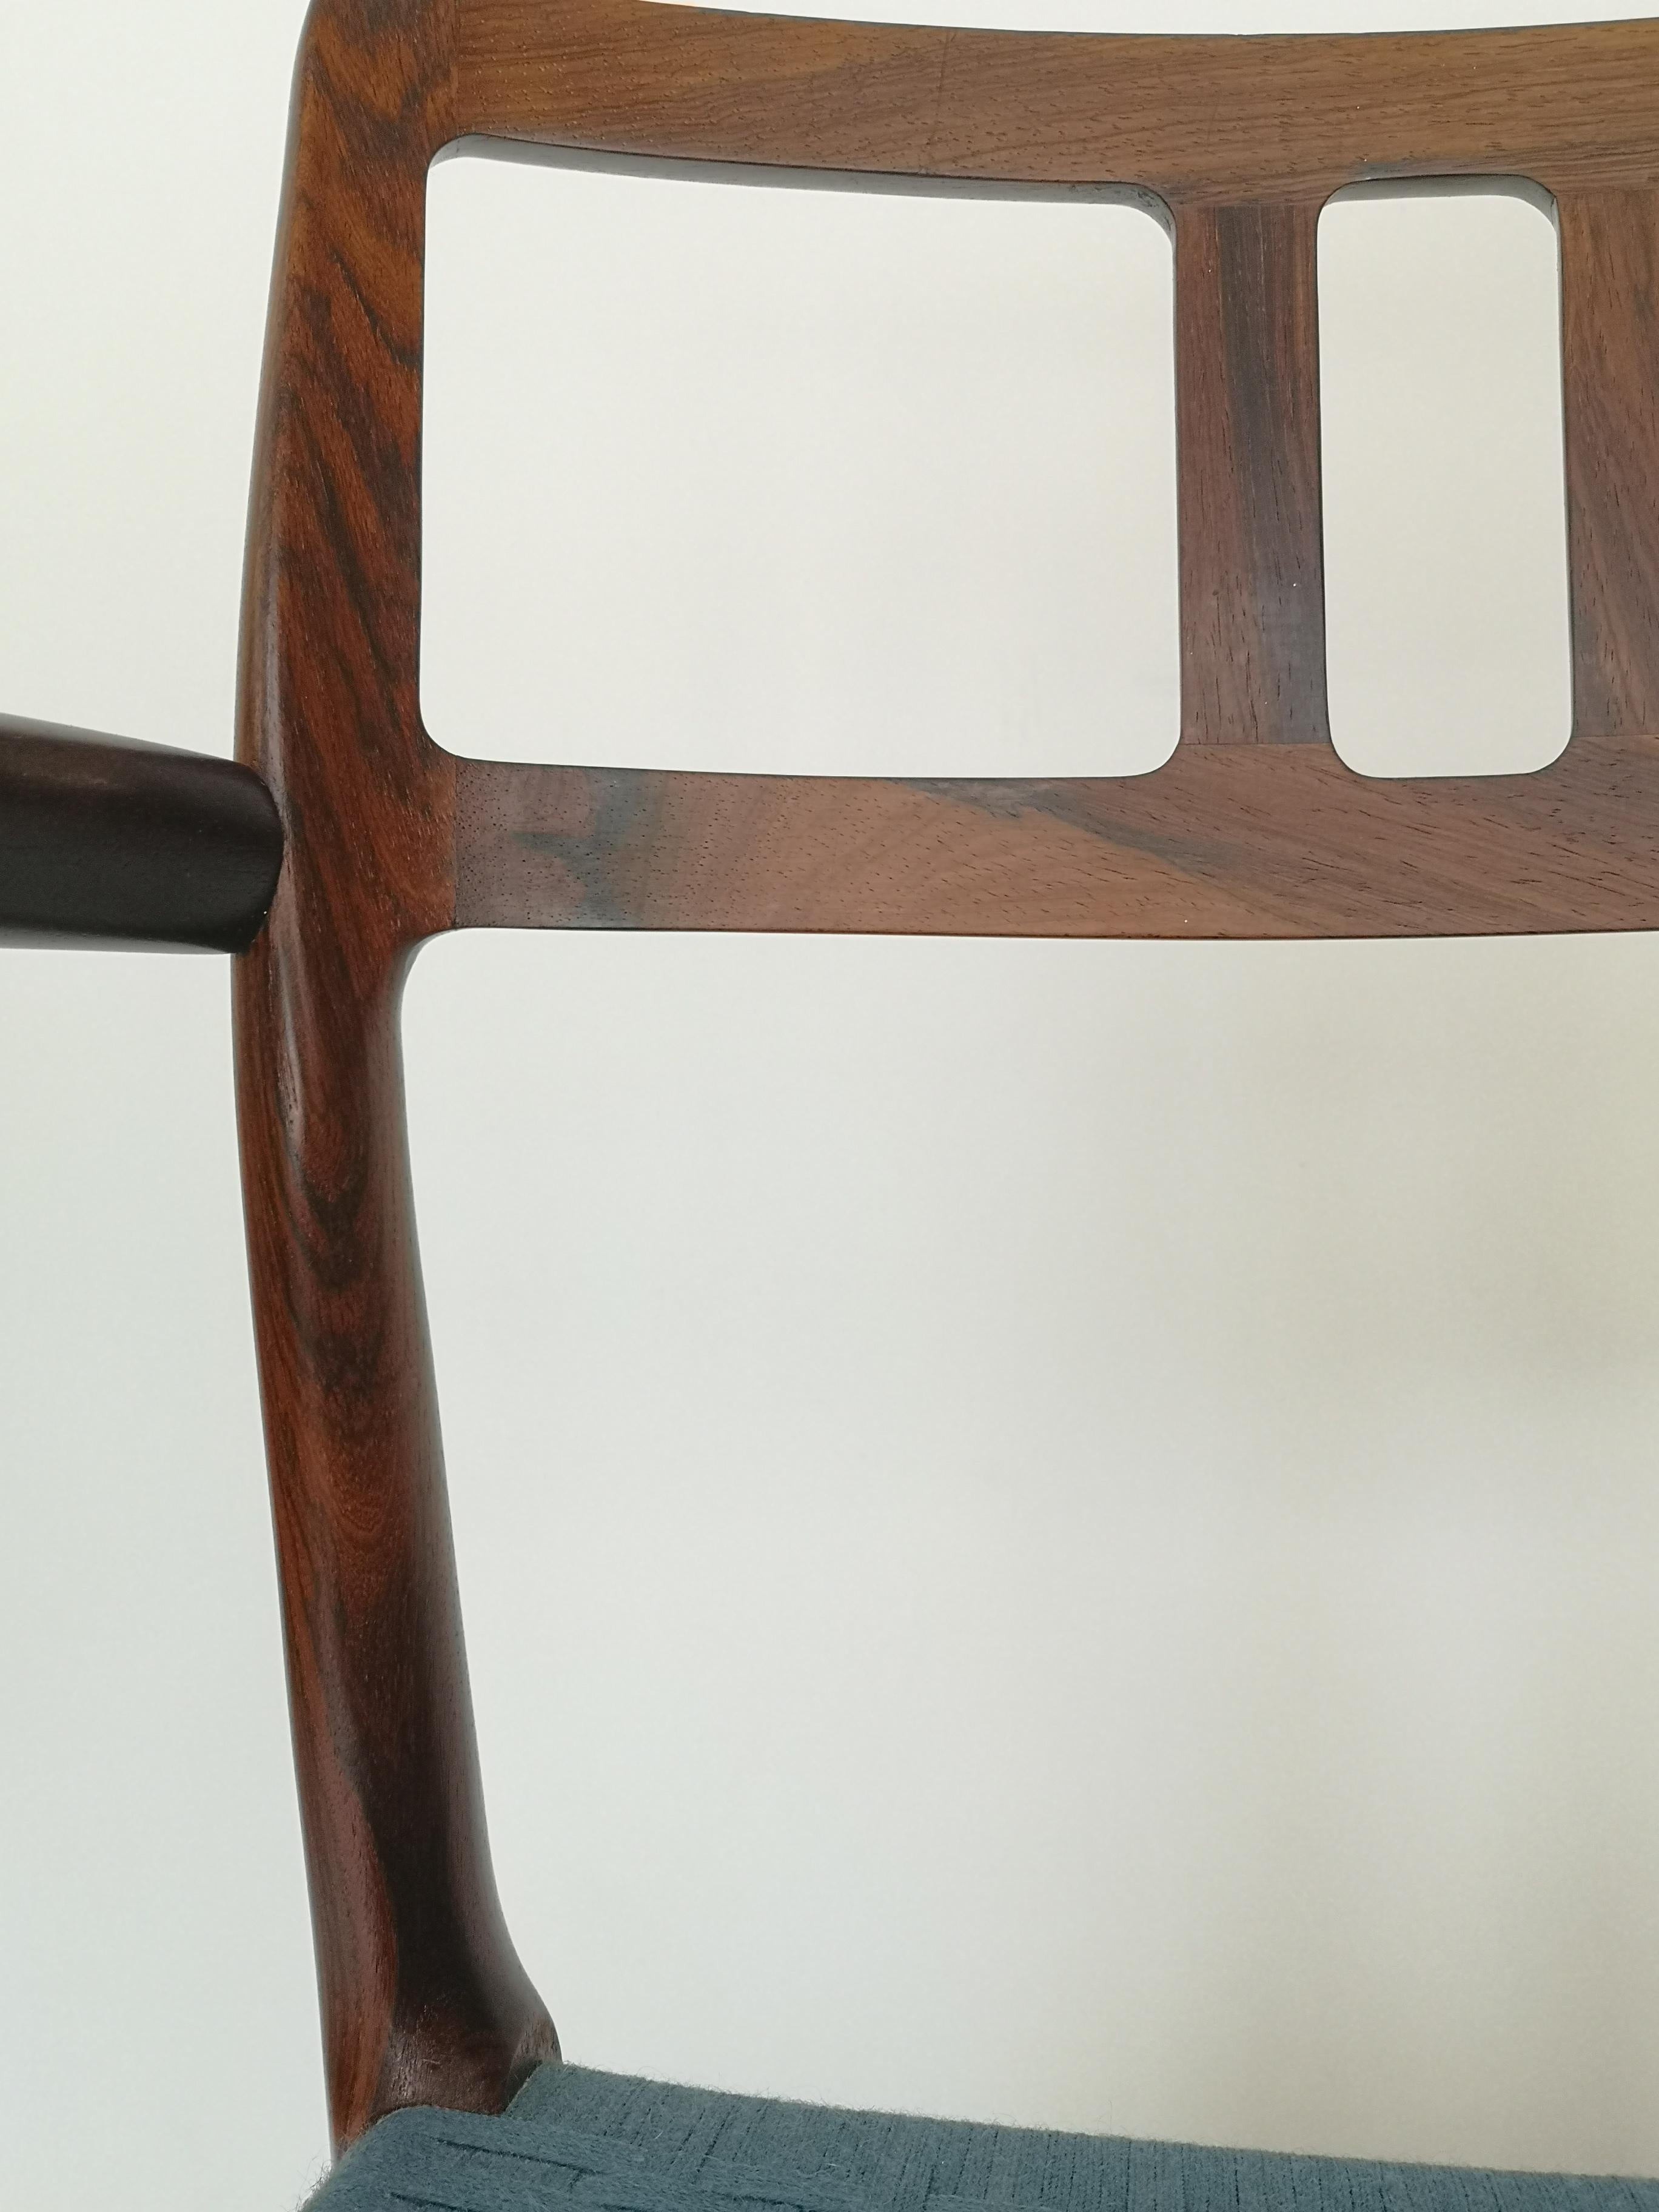 Model 64 Rosewood Armchair by Niels Moller In Good Condition For Sale In Victoria, BC